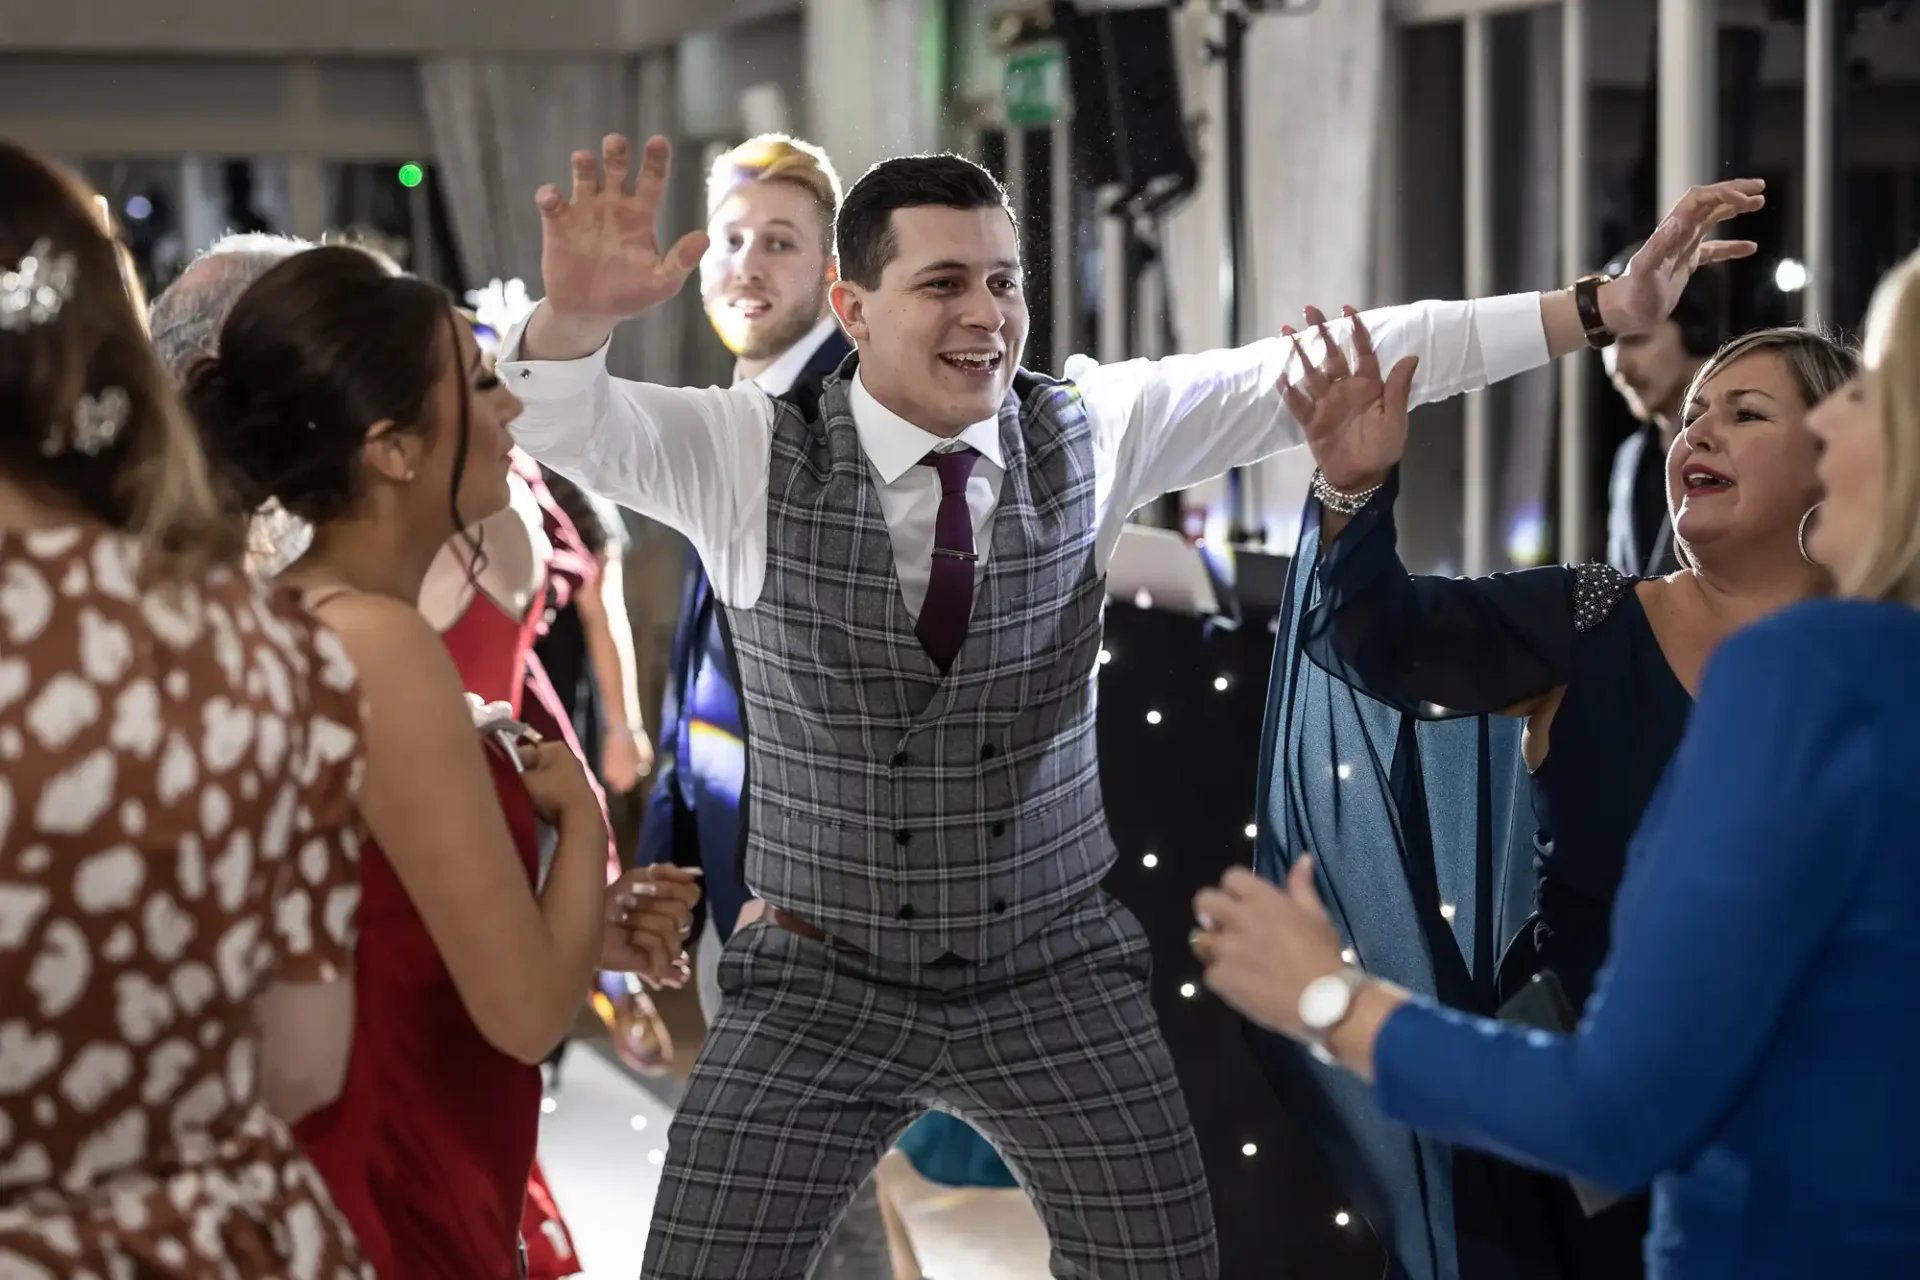 A man in a plaid suit dancing joyfully with raised arms among a group of elegantly dressed people at a lively indoor party.